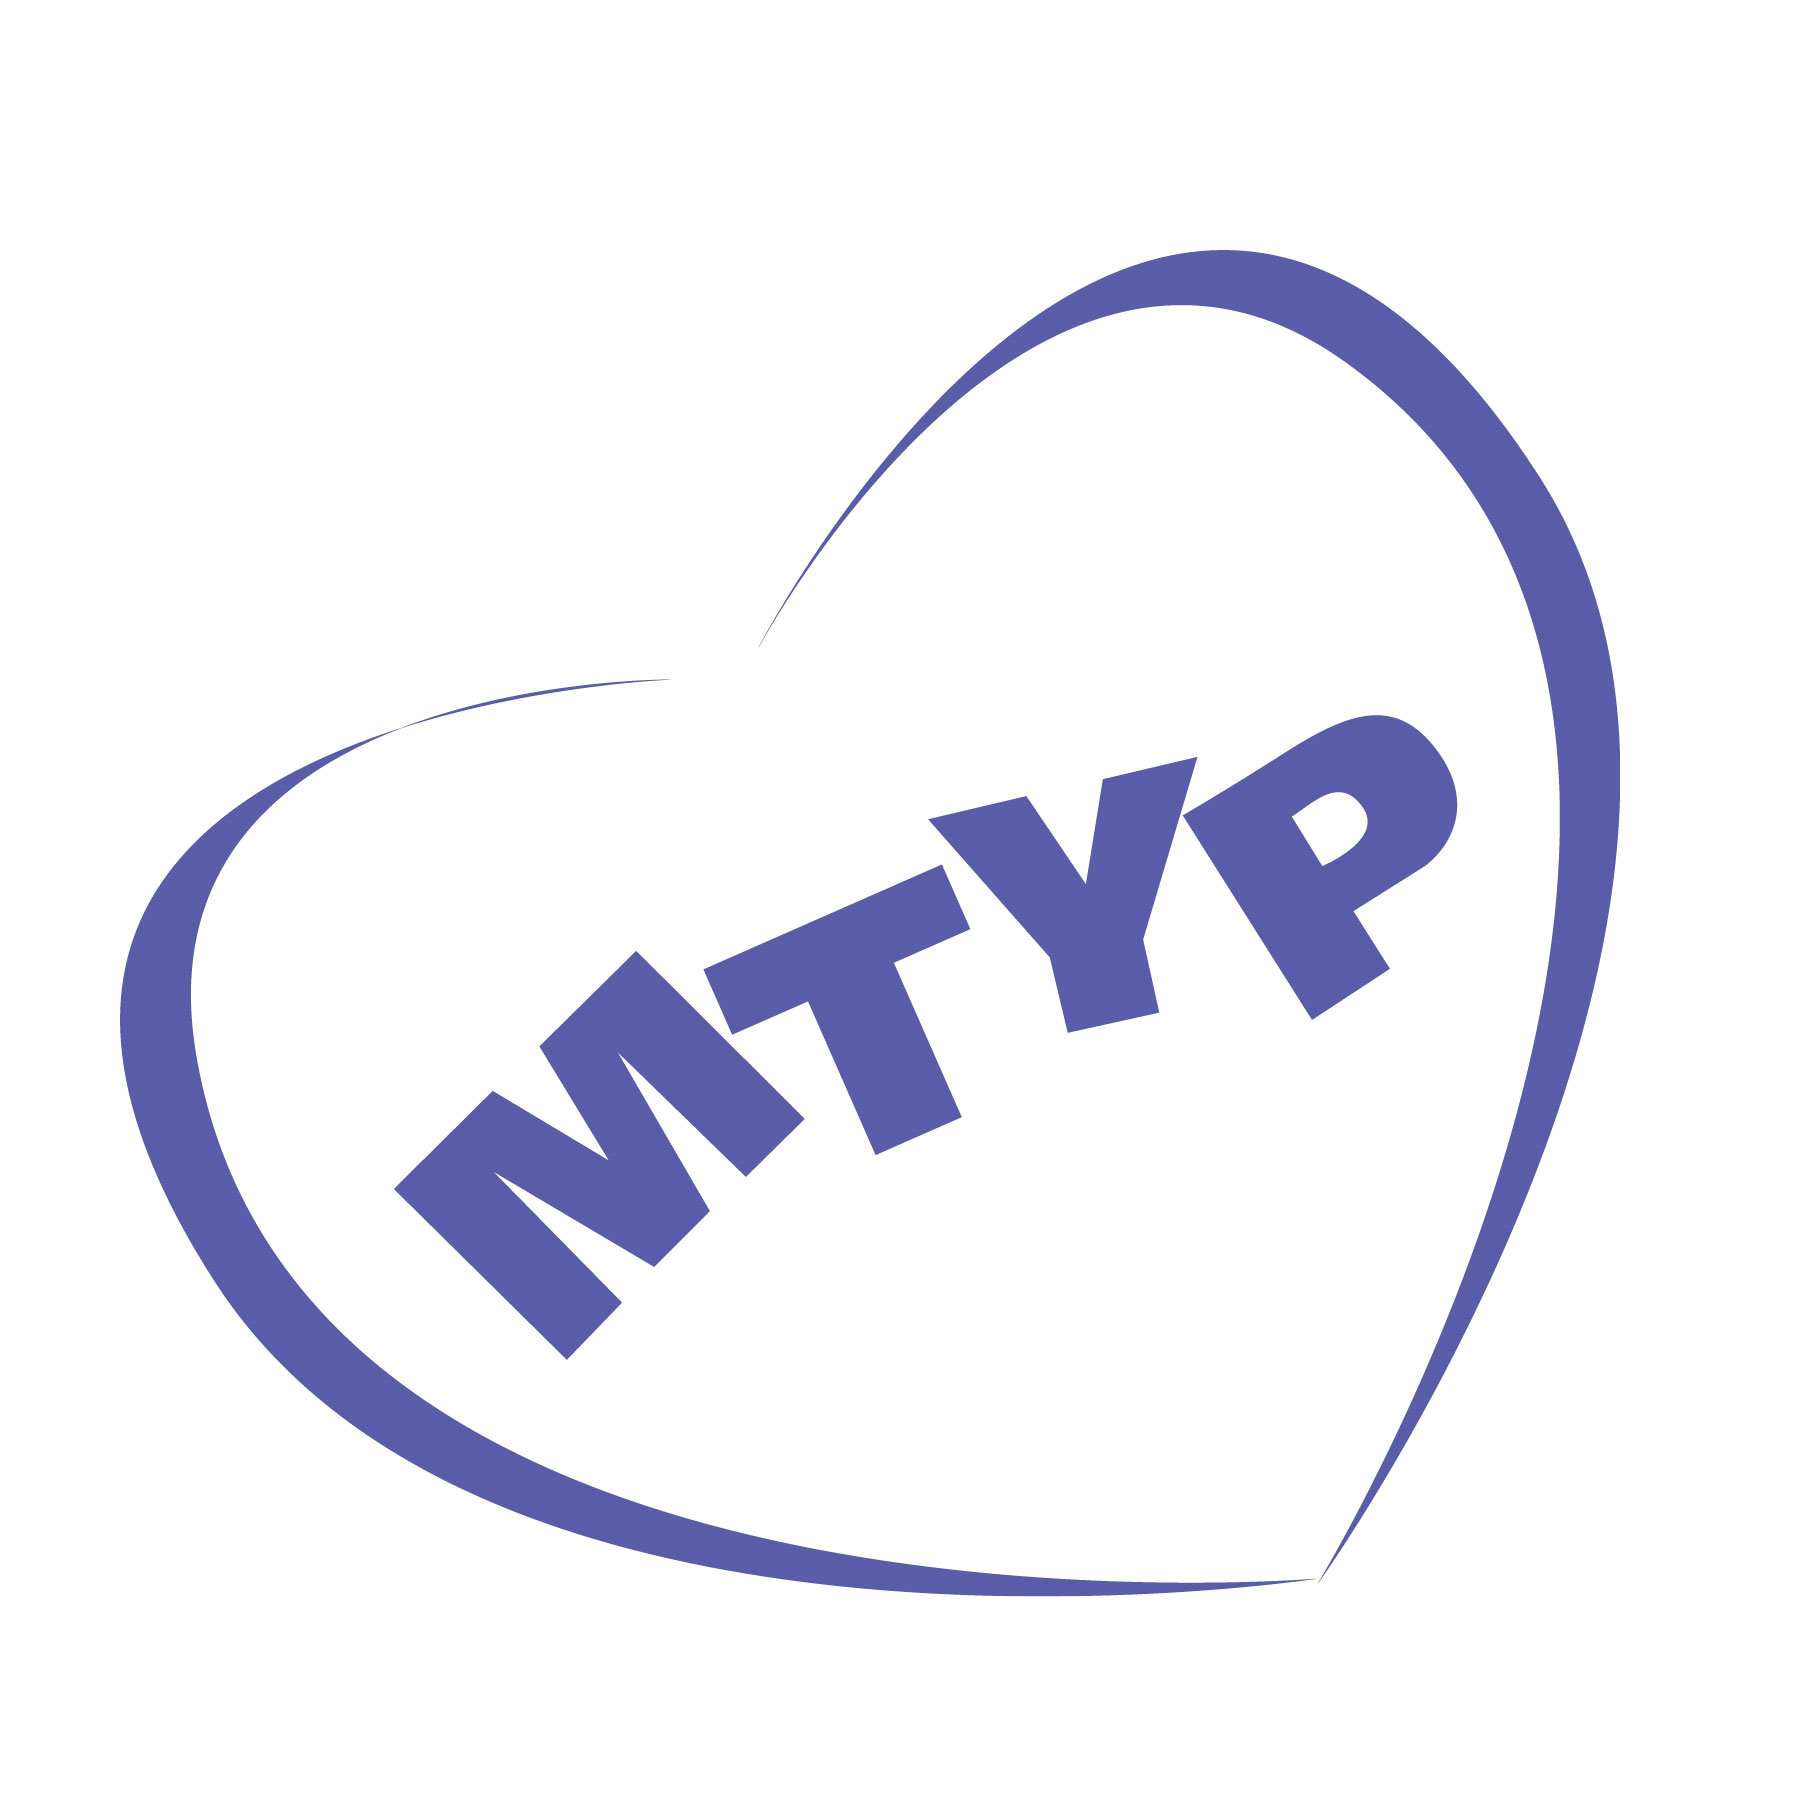 Manitoba Theatre for Young People logo - the acronym MTYP is inside a purple heart